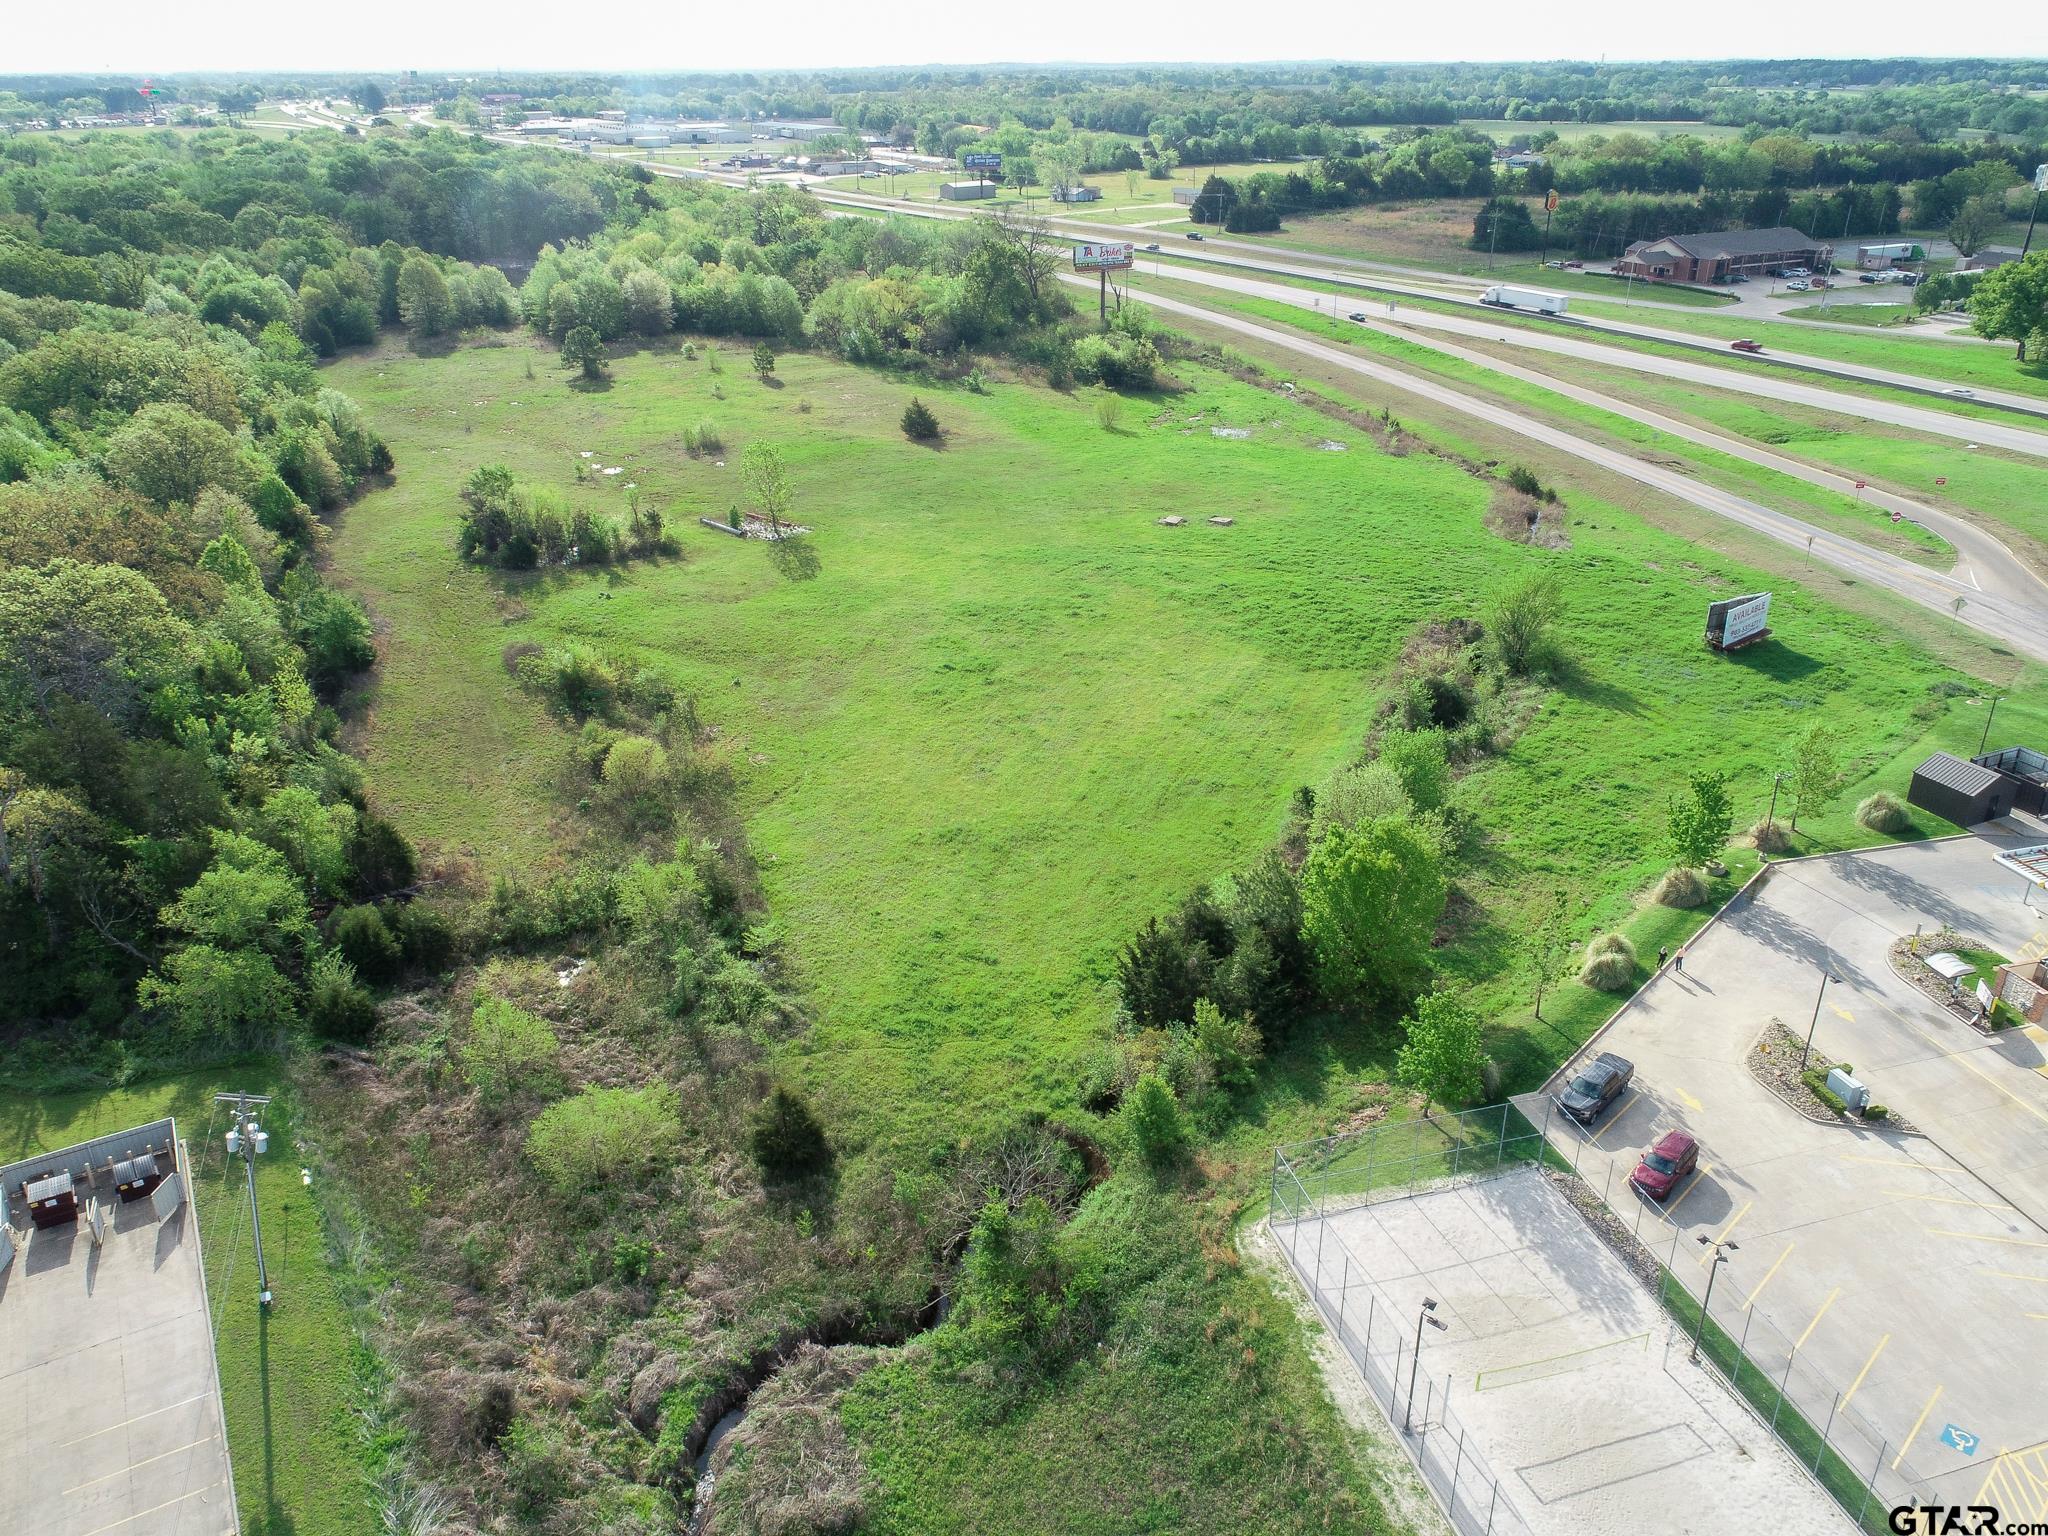 The west end of the property adjacent to the east boundary of Sonic looking south across I-30.